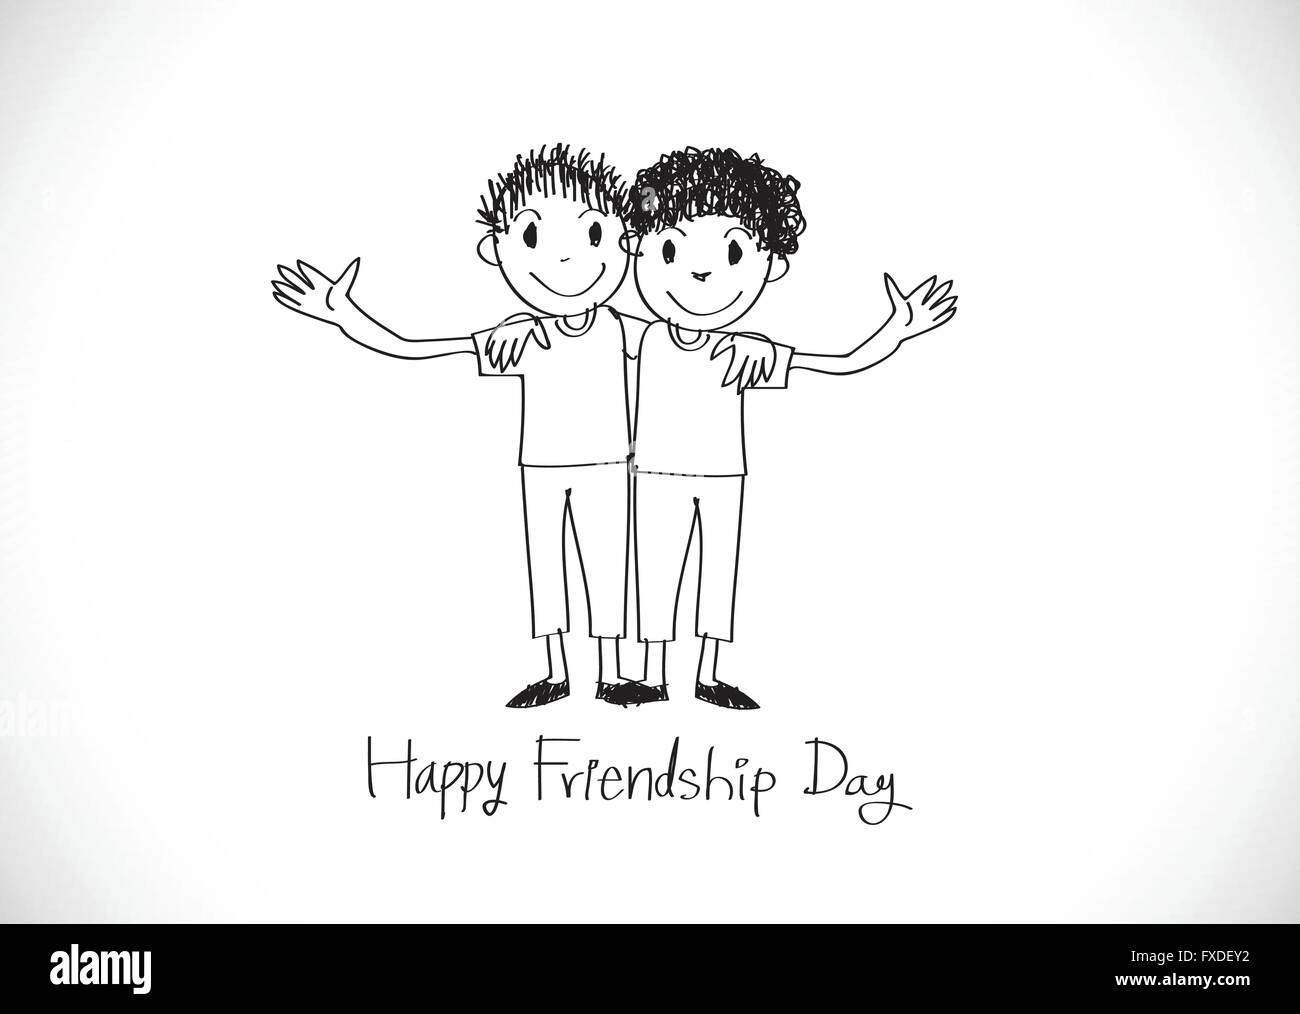 Friendship Drawing Vector Images (over 29,000)-saigonsouth.com.vn